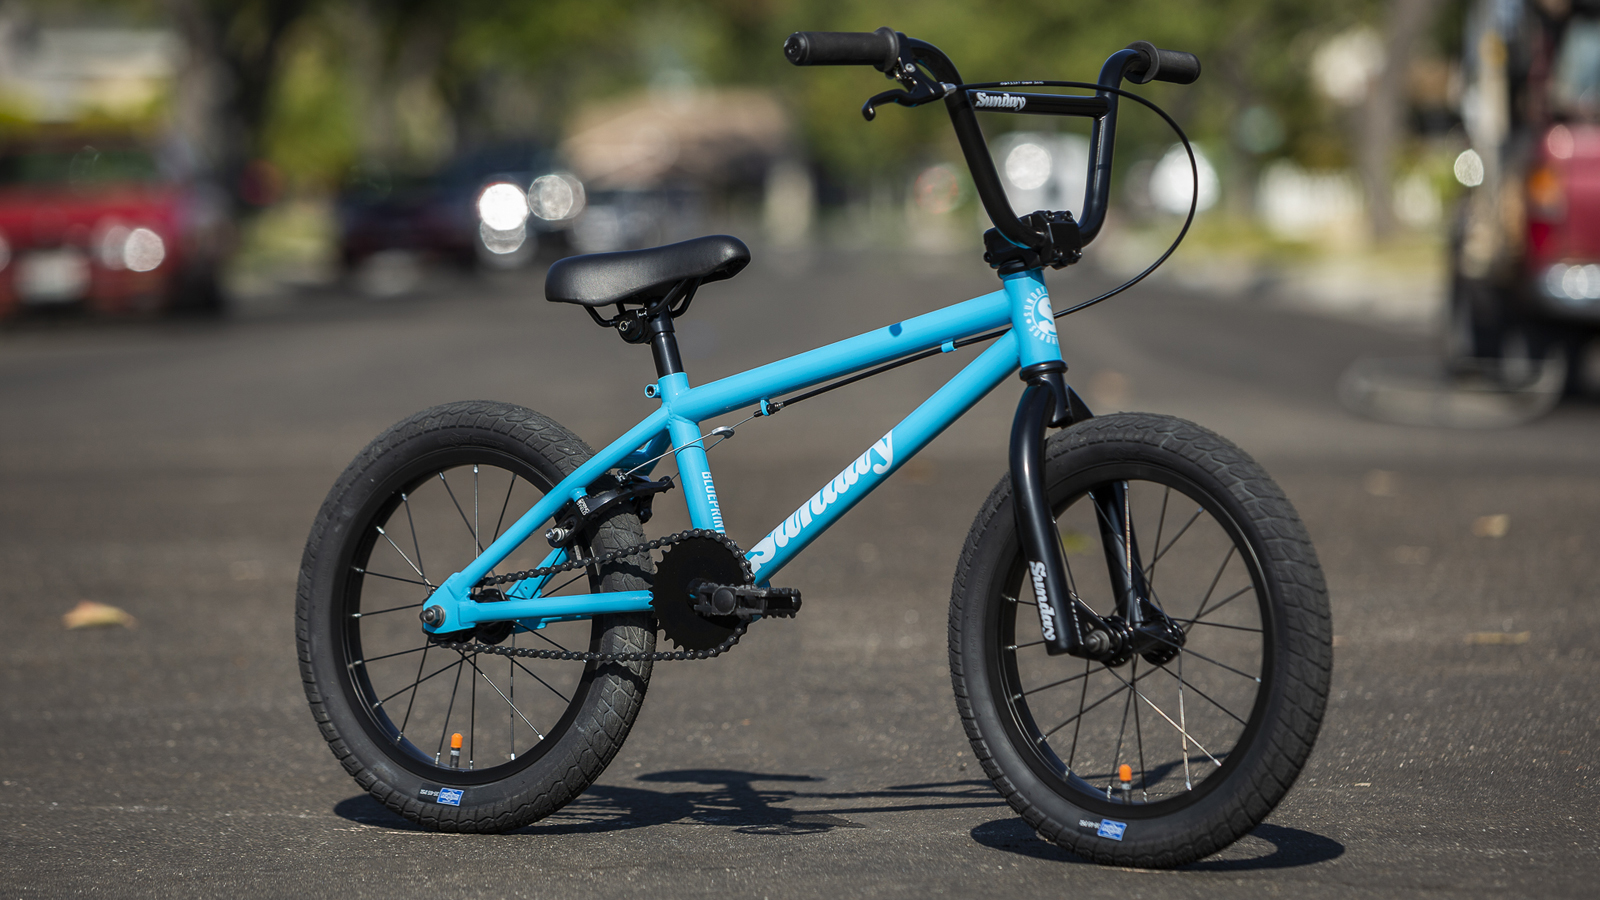 5. Cheap BMX Bikes: Affordability and Purchase Options